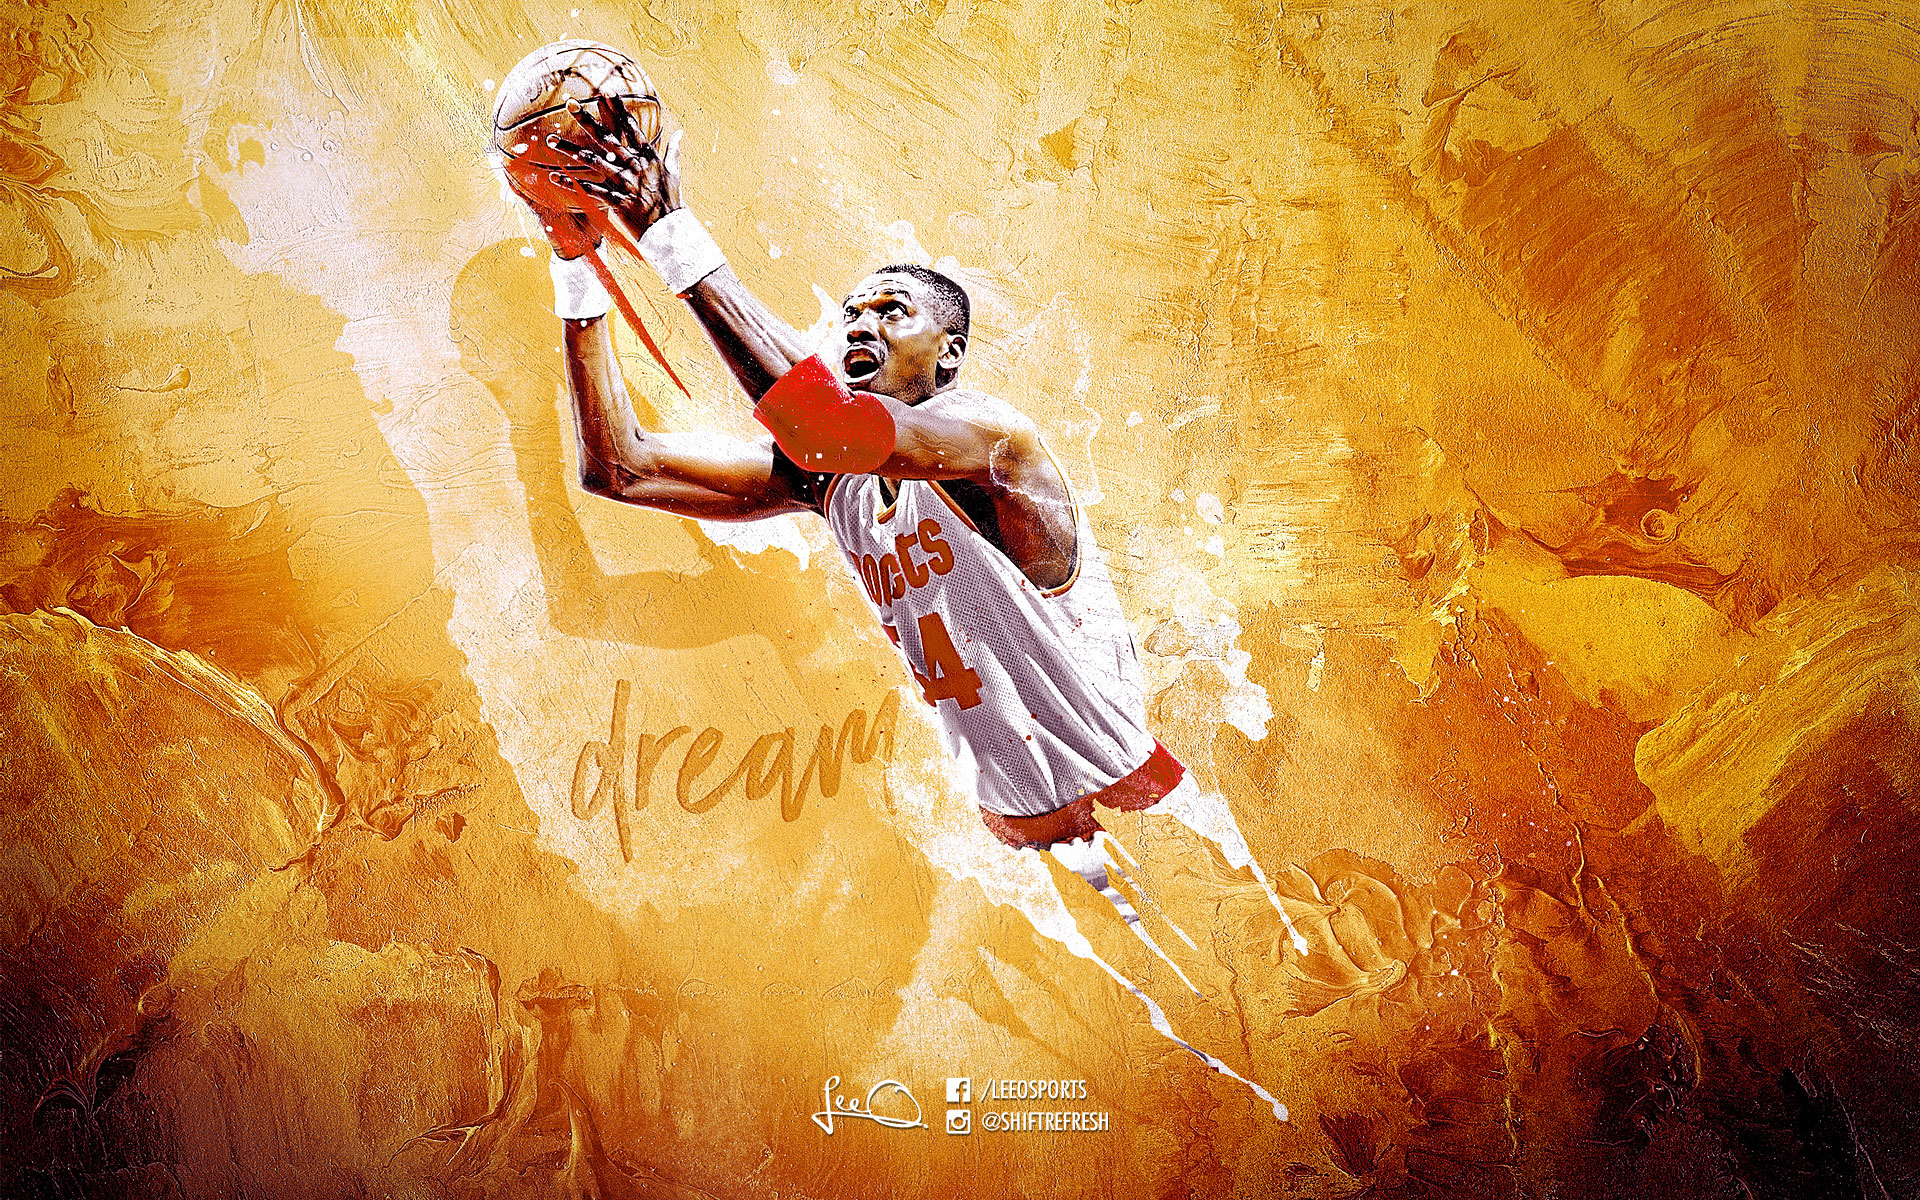 Houston Rockets Wallpapers at BasketWallpapers.com